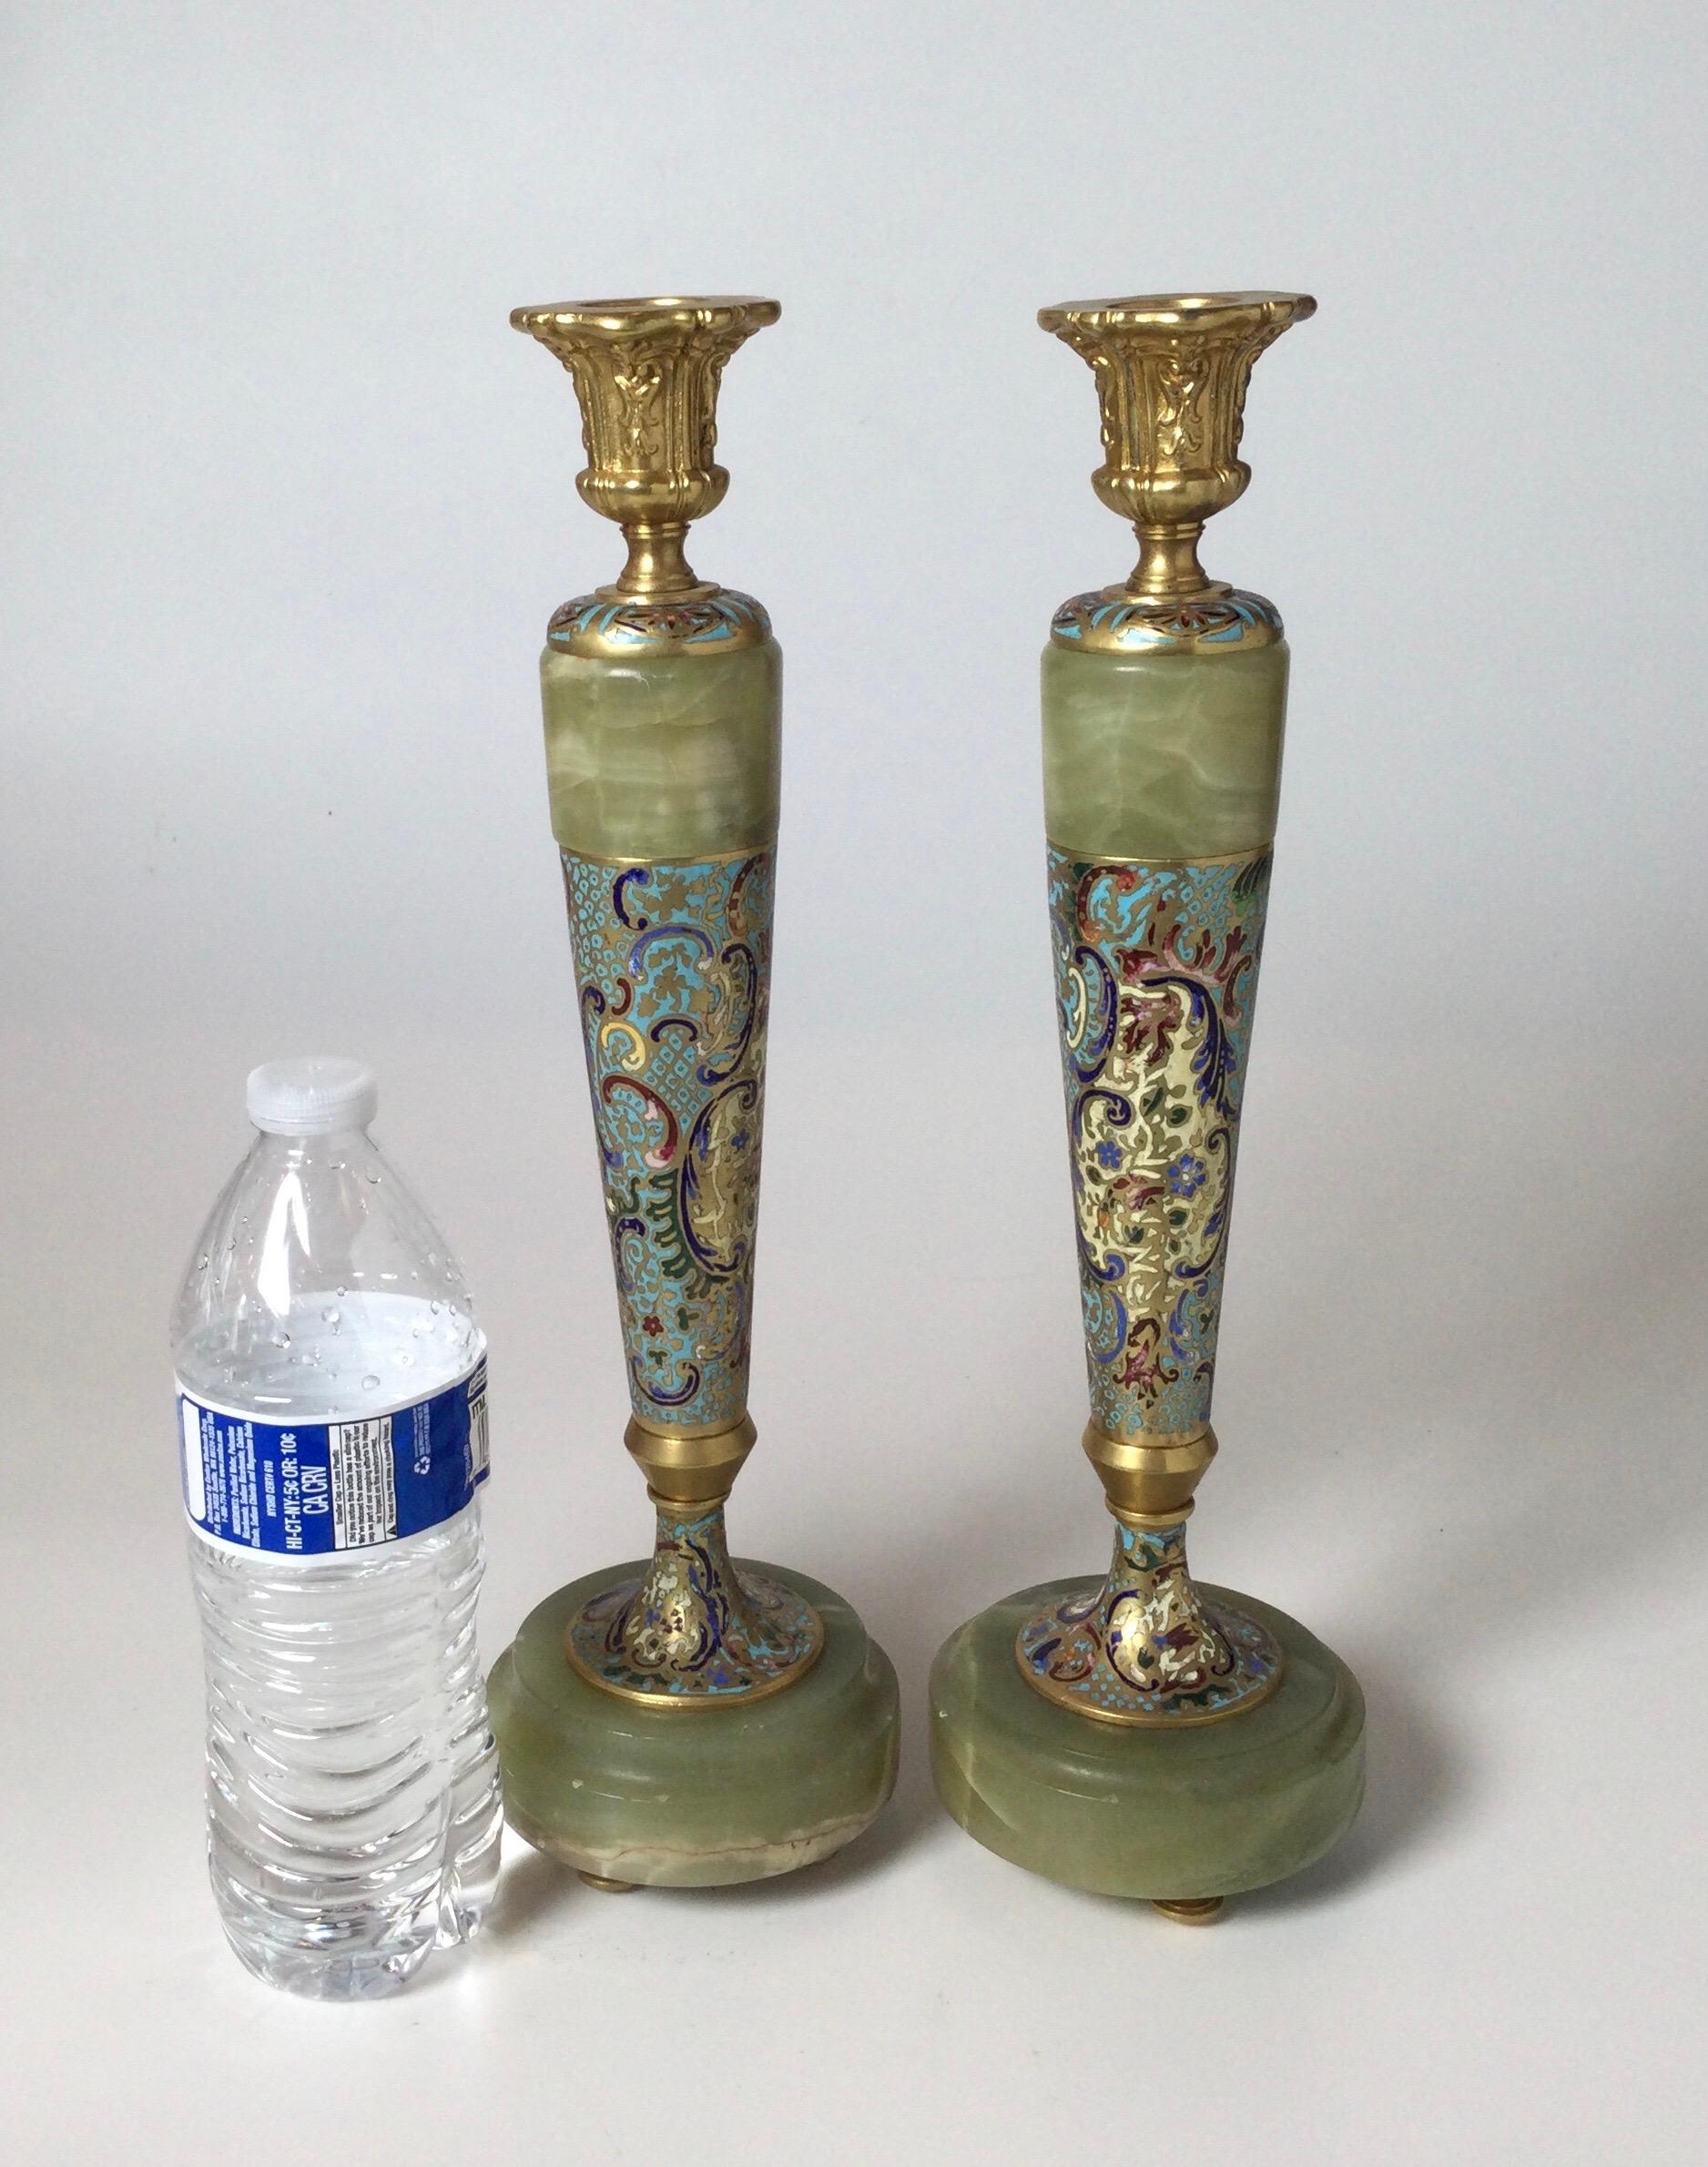 Circa 1900 gilt bronze Champleve' and onyx tall candlesticks
Beautiful example of French 19th century hand enameled candlesticks, nicely weighted with onyx bases.
Dimensions: 13.75